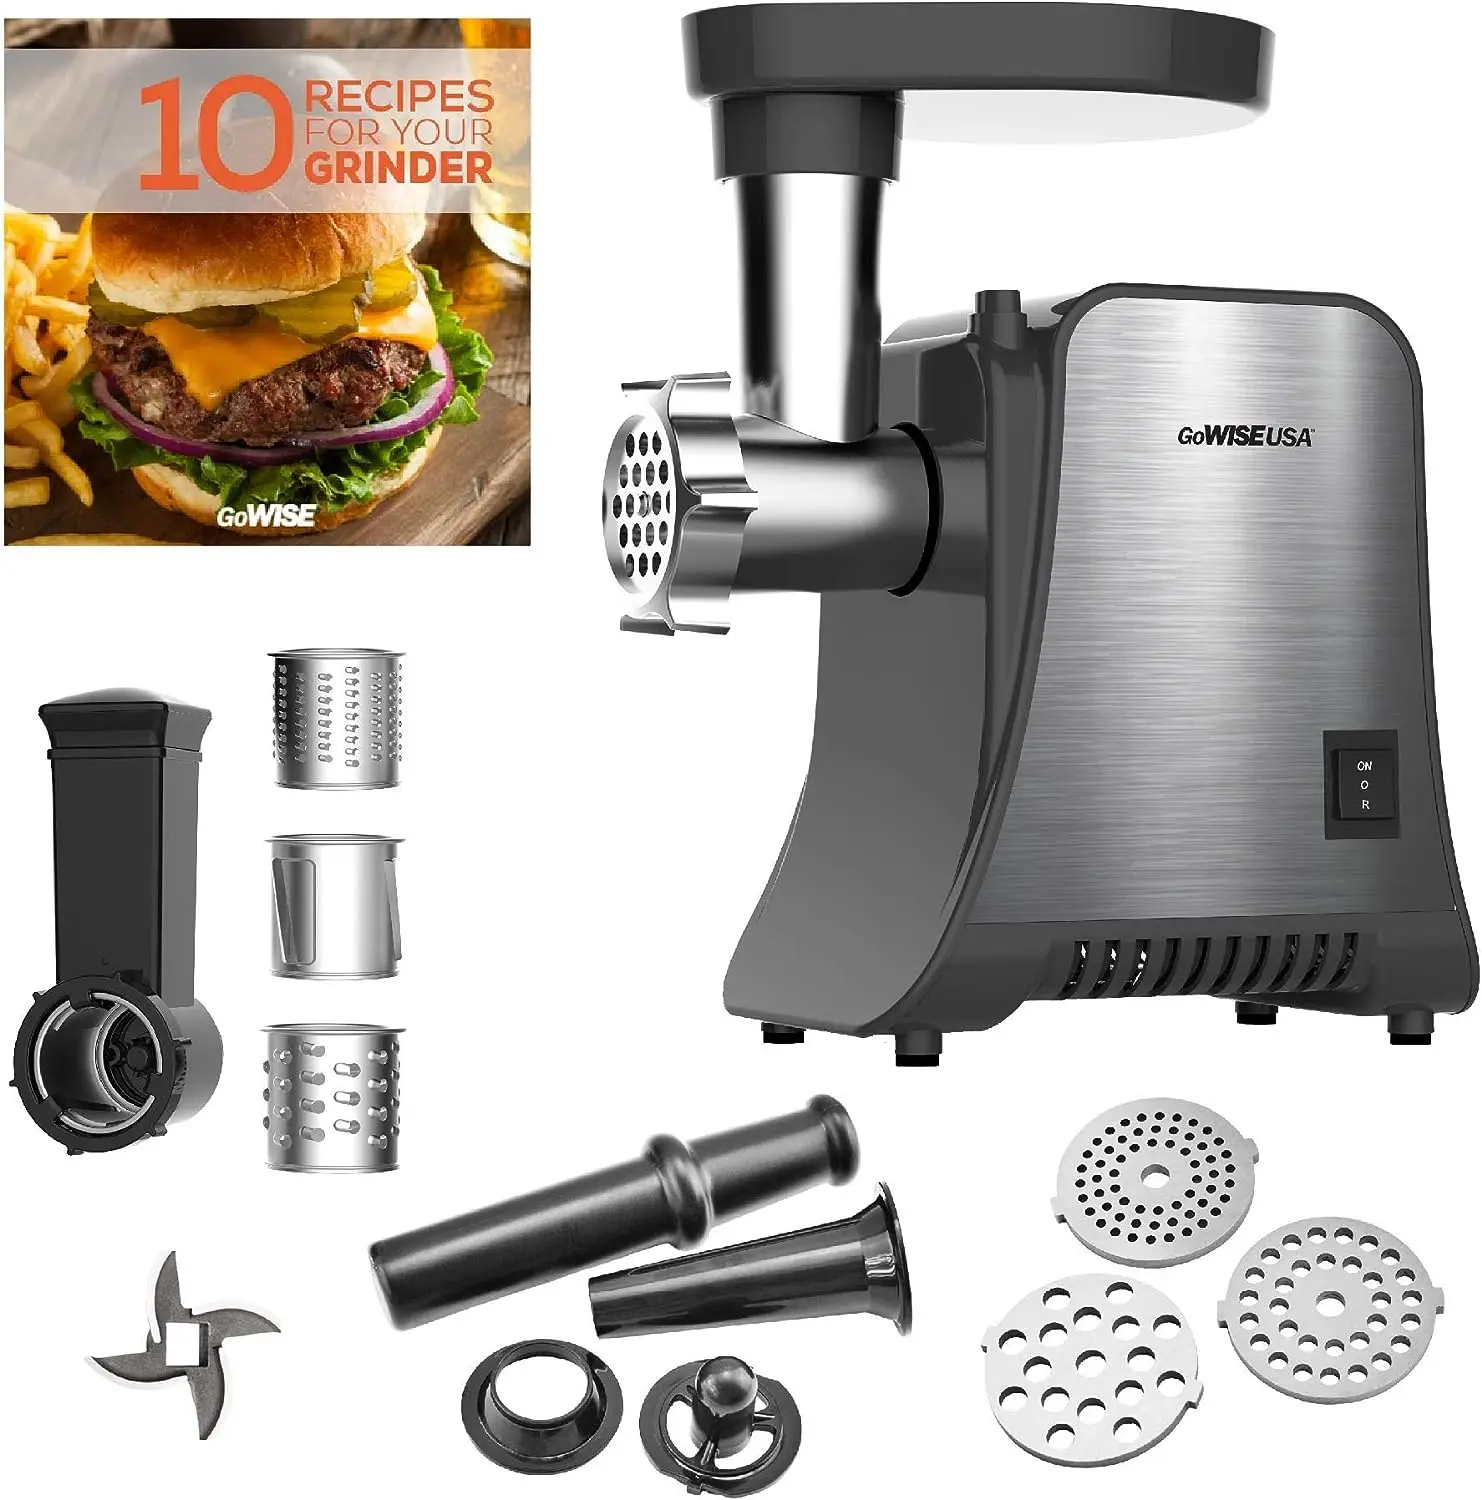 

800-Watt Max Grinder & Food 4-in-1 Meat Grinder and Food Processor, Small, Stainless Steel